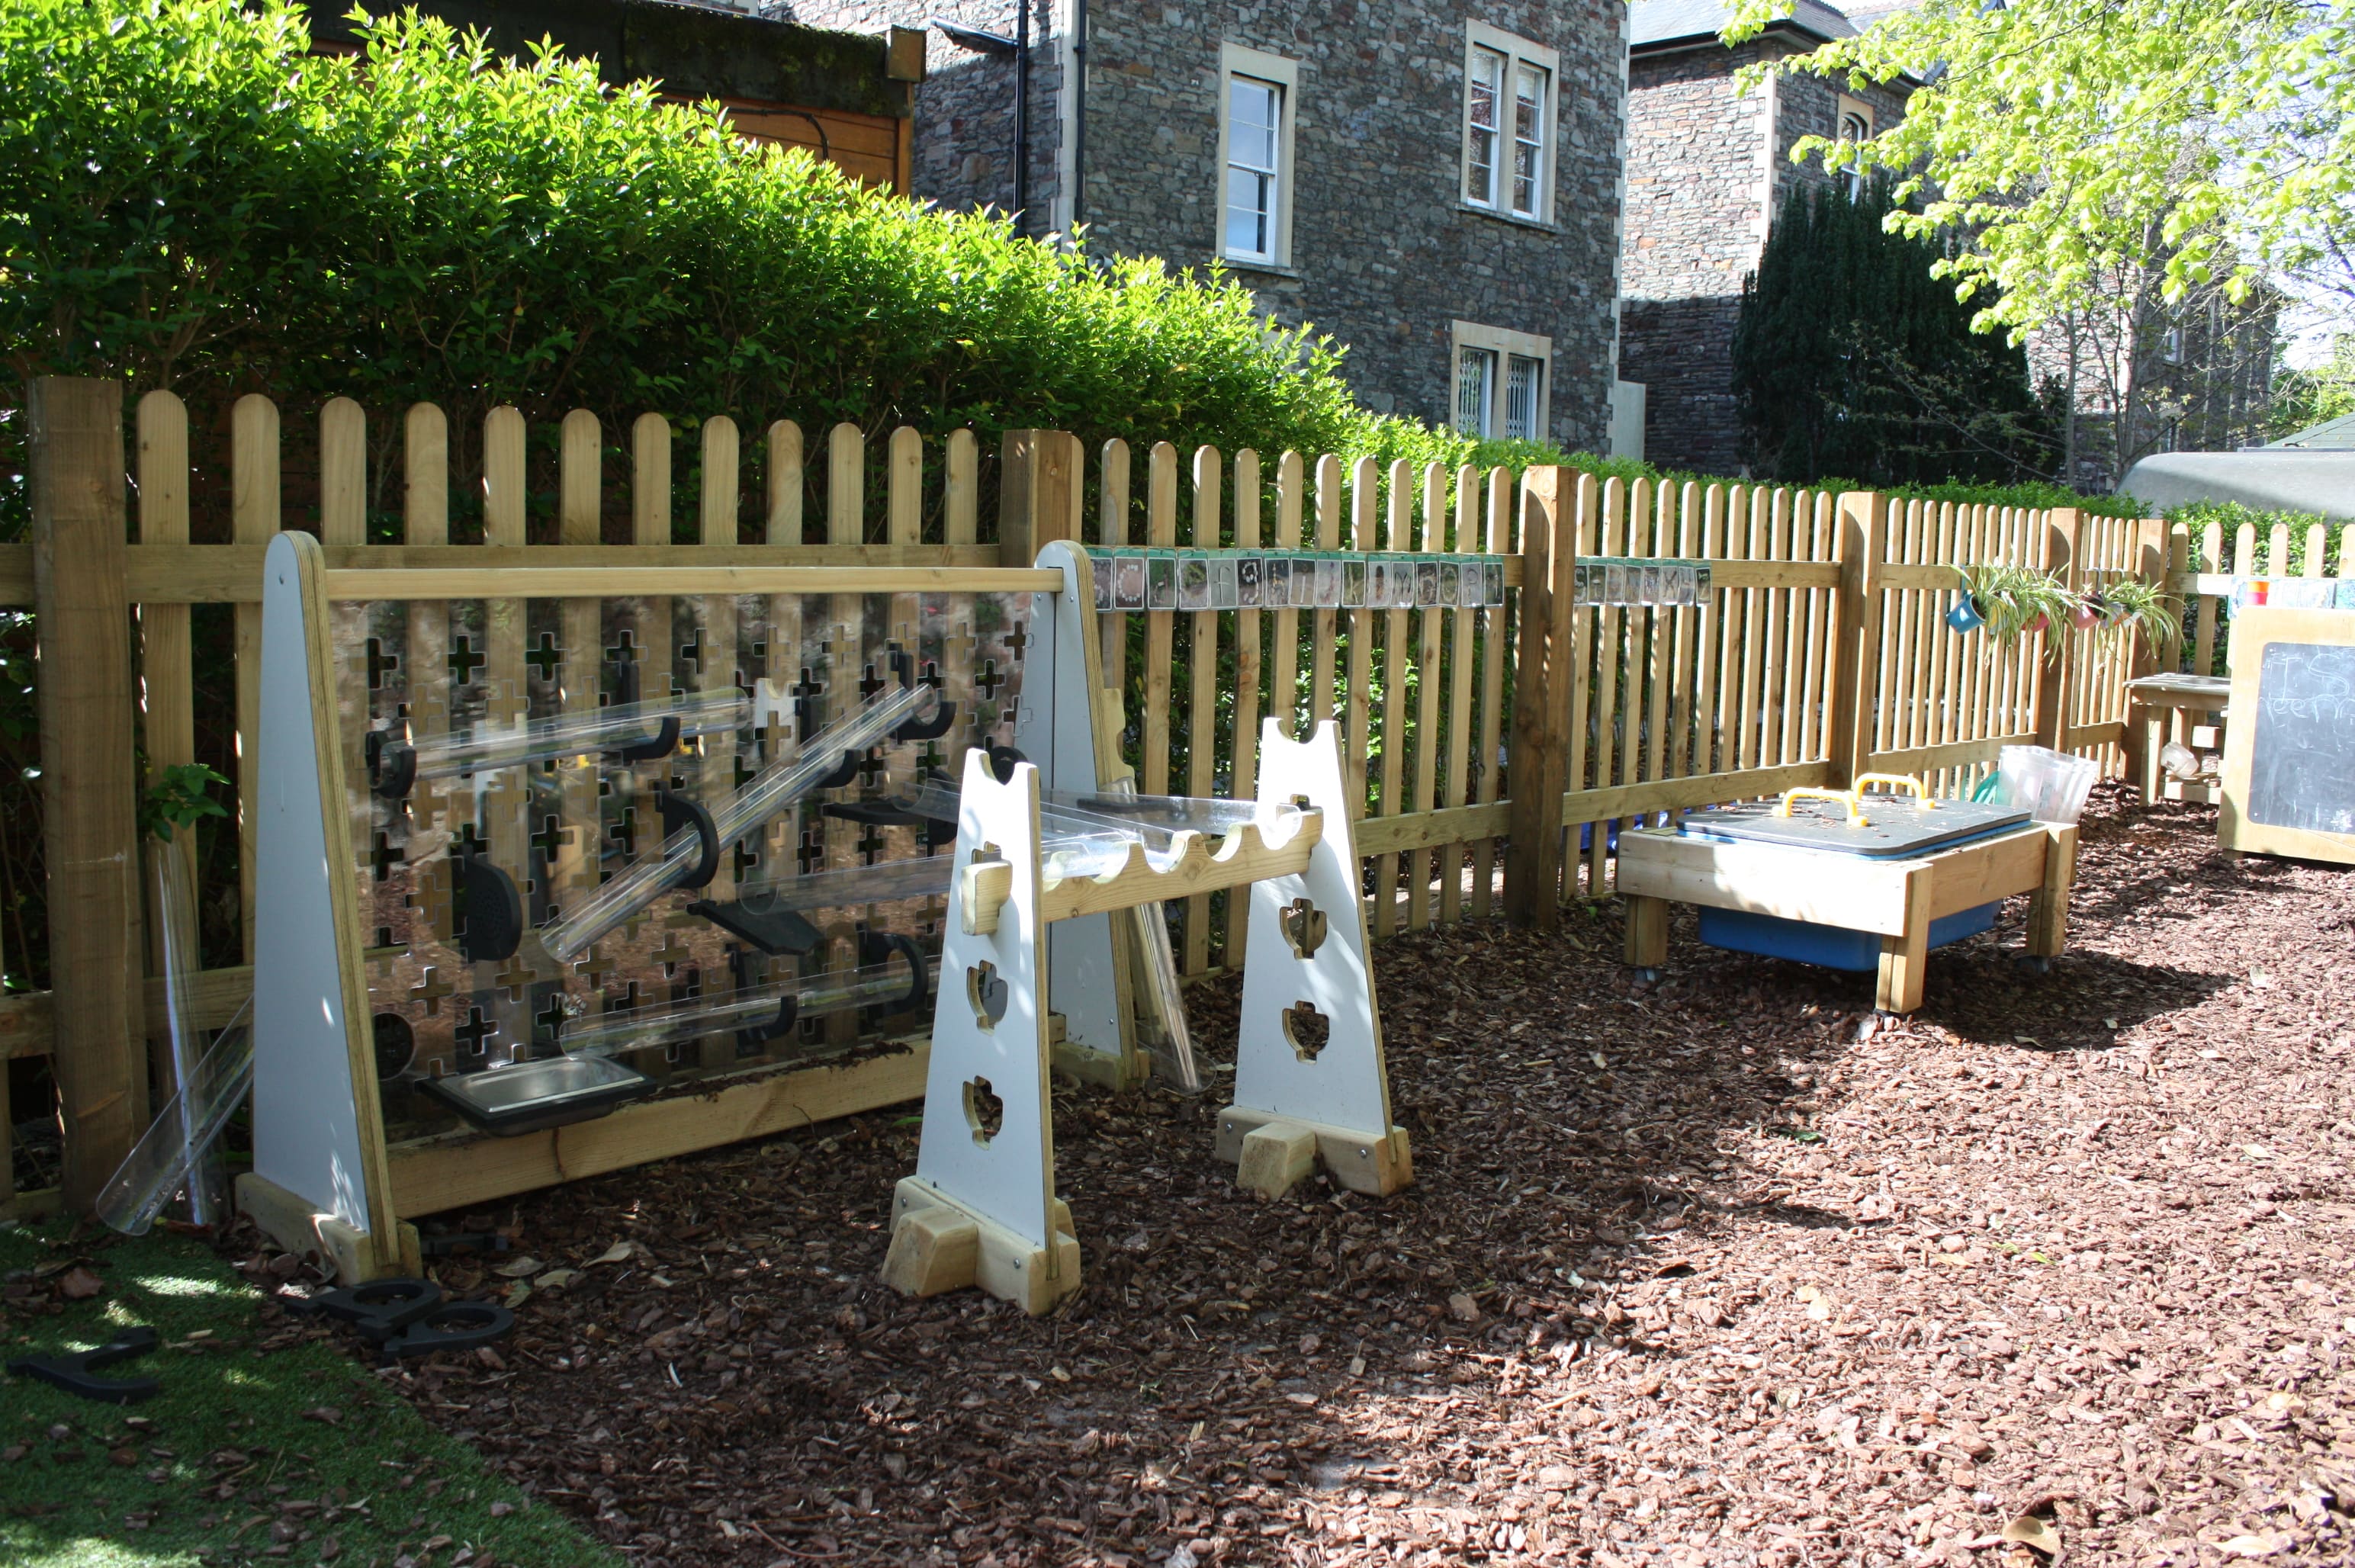 The water wall is shown leaning on a wooden fence, as the plastic tubes can be seen pointing down to a silver tray. Some tubes come out from the wall and lead to another wooden stand. Beside it is the sand table, which has a wooden lid on it and wheels.